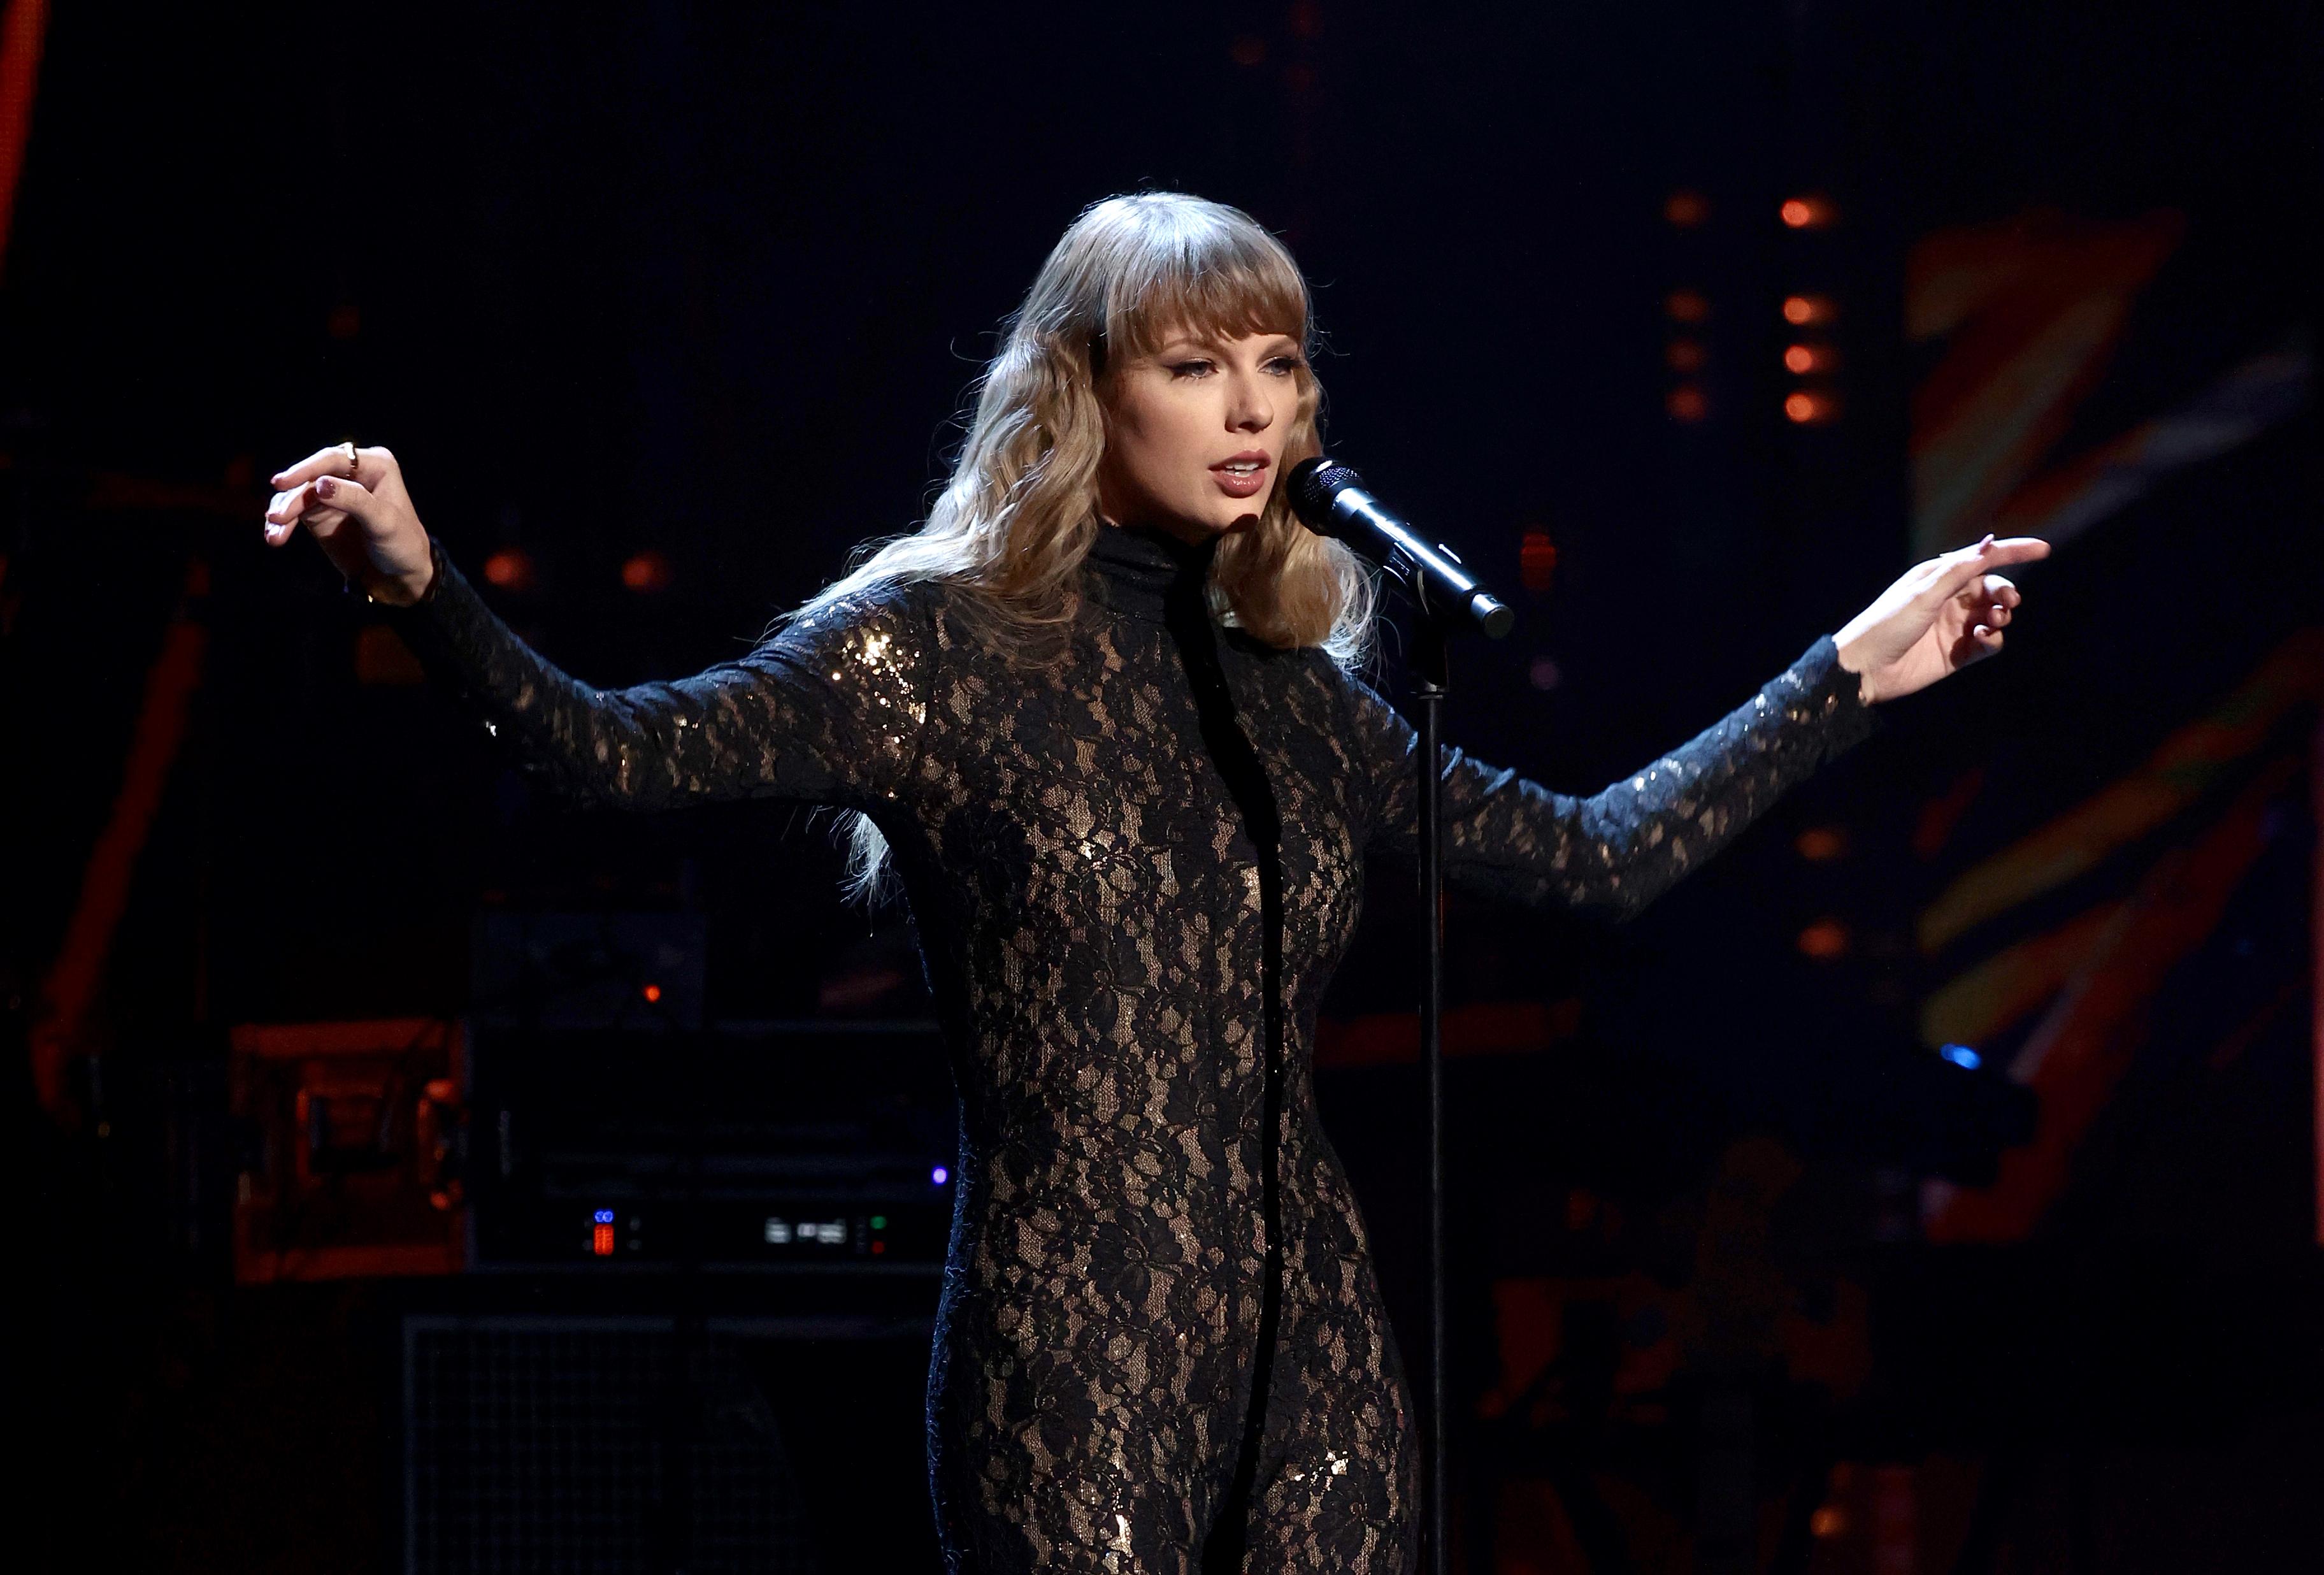 Taylor performing onstage in a lacy turtleneck bodysuit